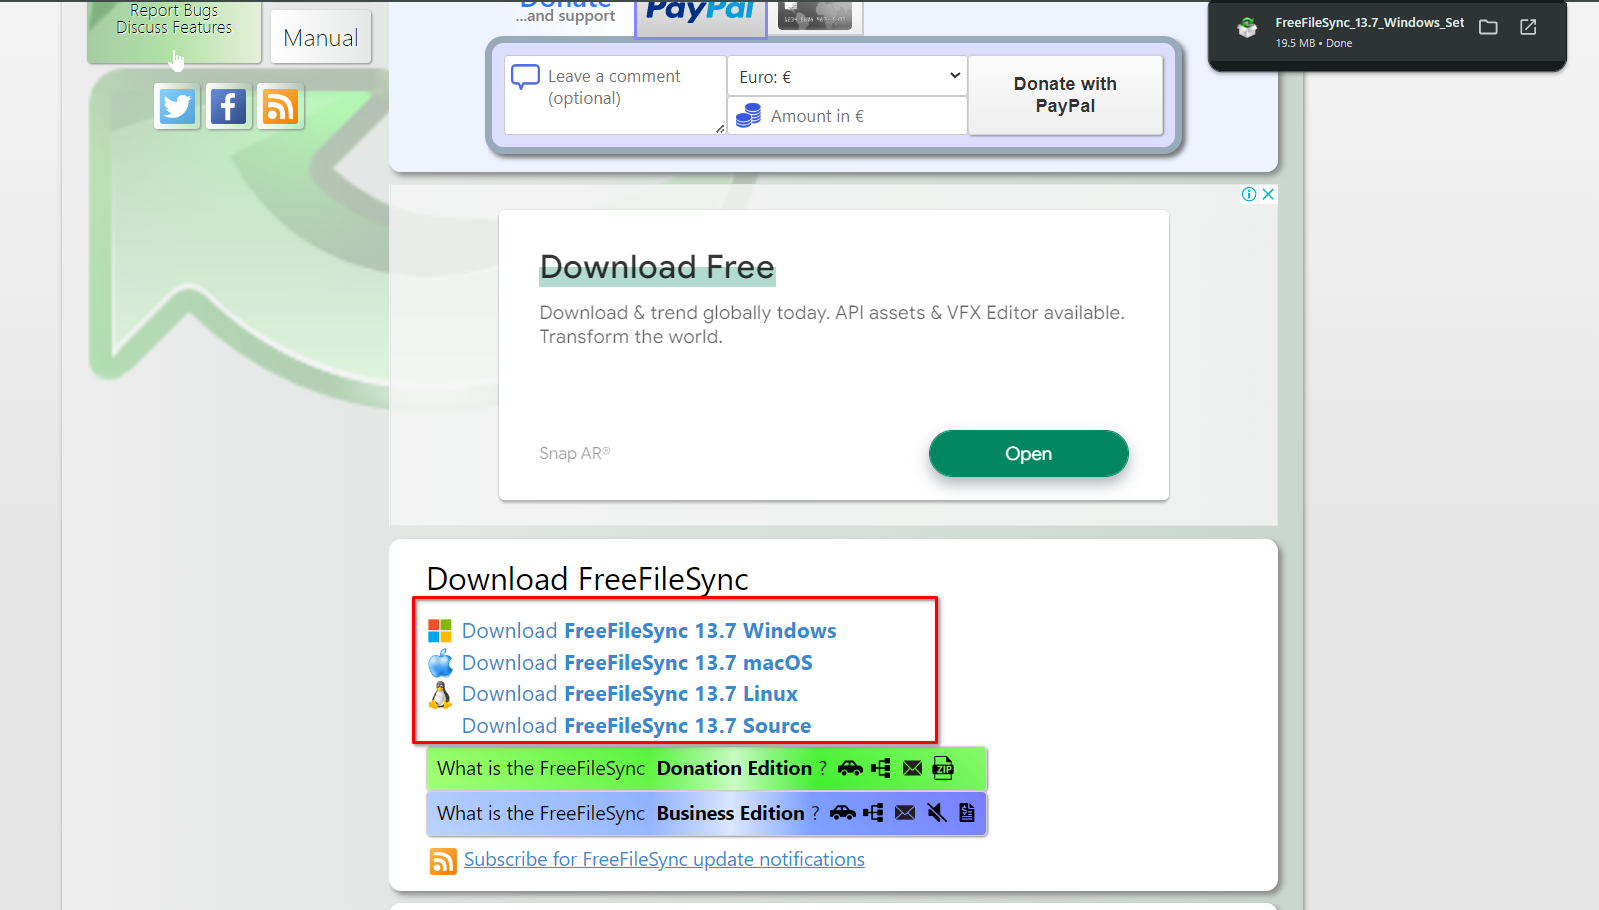 The official download page for FreeFileSync.